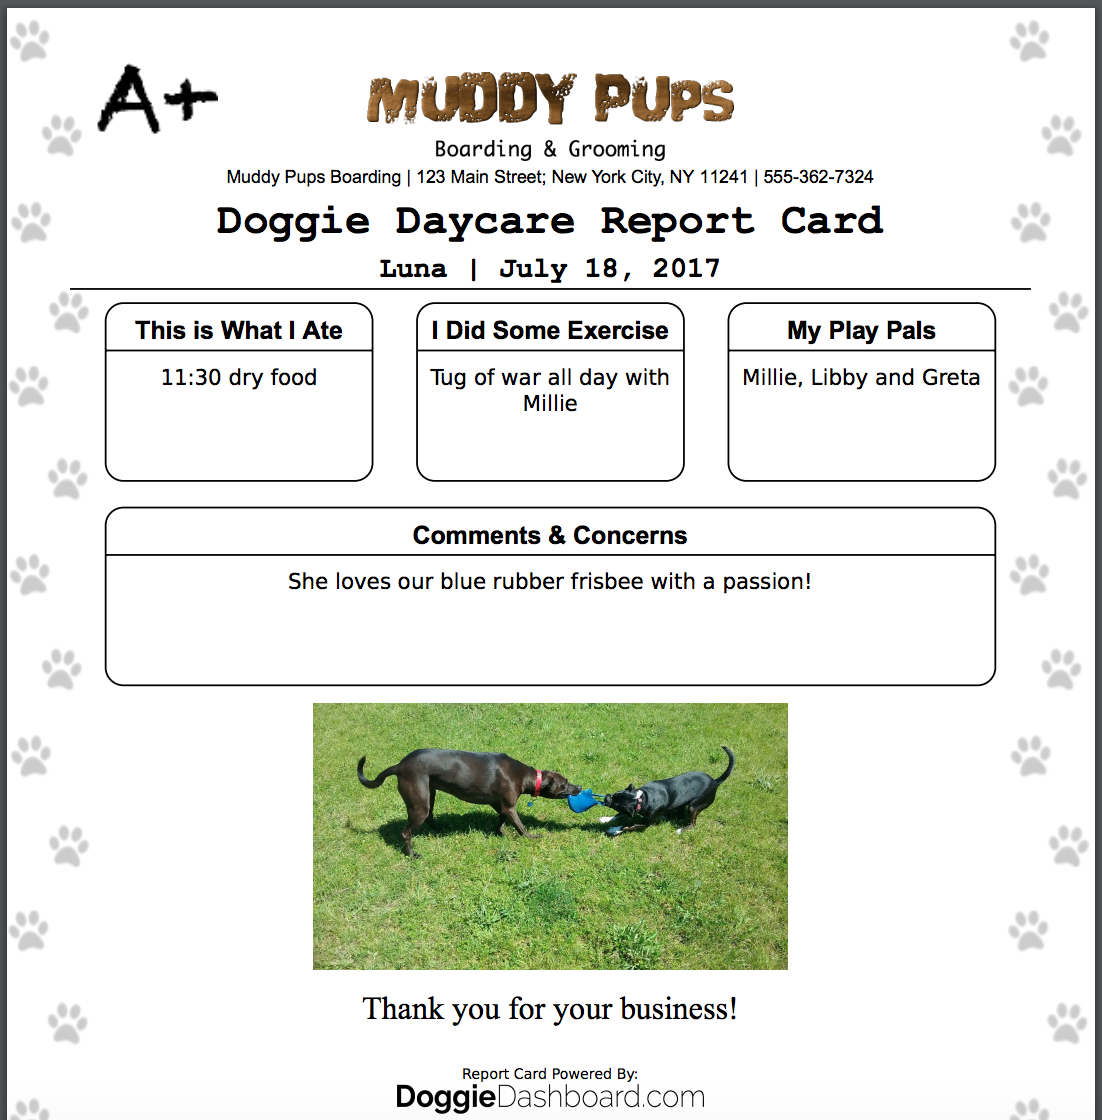 Doggiedashboard | Free Dog Daycare & Kennel Boarding Software With Regard To Dog Grooming Record Card Template